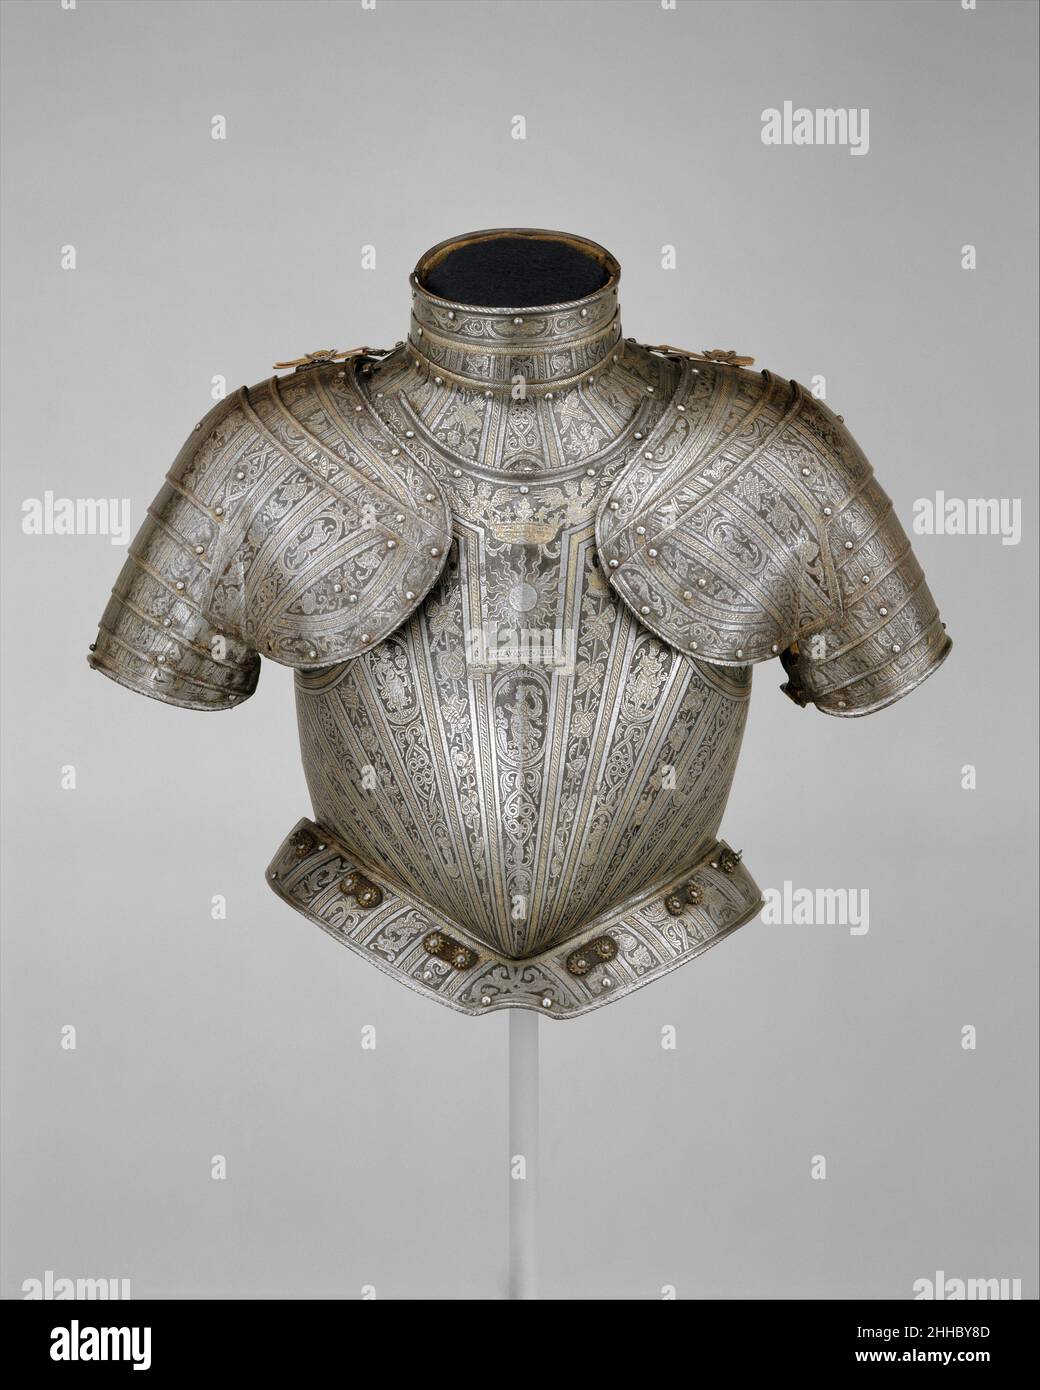 Portions of an Armor for Vincenzo Luigi di Capua (d. 1627) ca. 1595 Pompeo della Cesa Italian These elements form part of a light-cavalry or infantry armor made for the Neapolitan nobleman Vincenzo Luigi di Capua (d. 1627), count of Altavilla and prince of Riccia. The breastplate bears his personal impresa (emblem), a sunburst above the motto Nulla Quies Alibi (No Repose But Here).Pompeo della Cesa, whose etched signature “Pompeo” is found near the top of the breastplate in the center, was the foremost Milanese armorer of the late sixteenth century. His patrons included Philip II of Spain, who Stock Photo